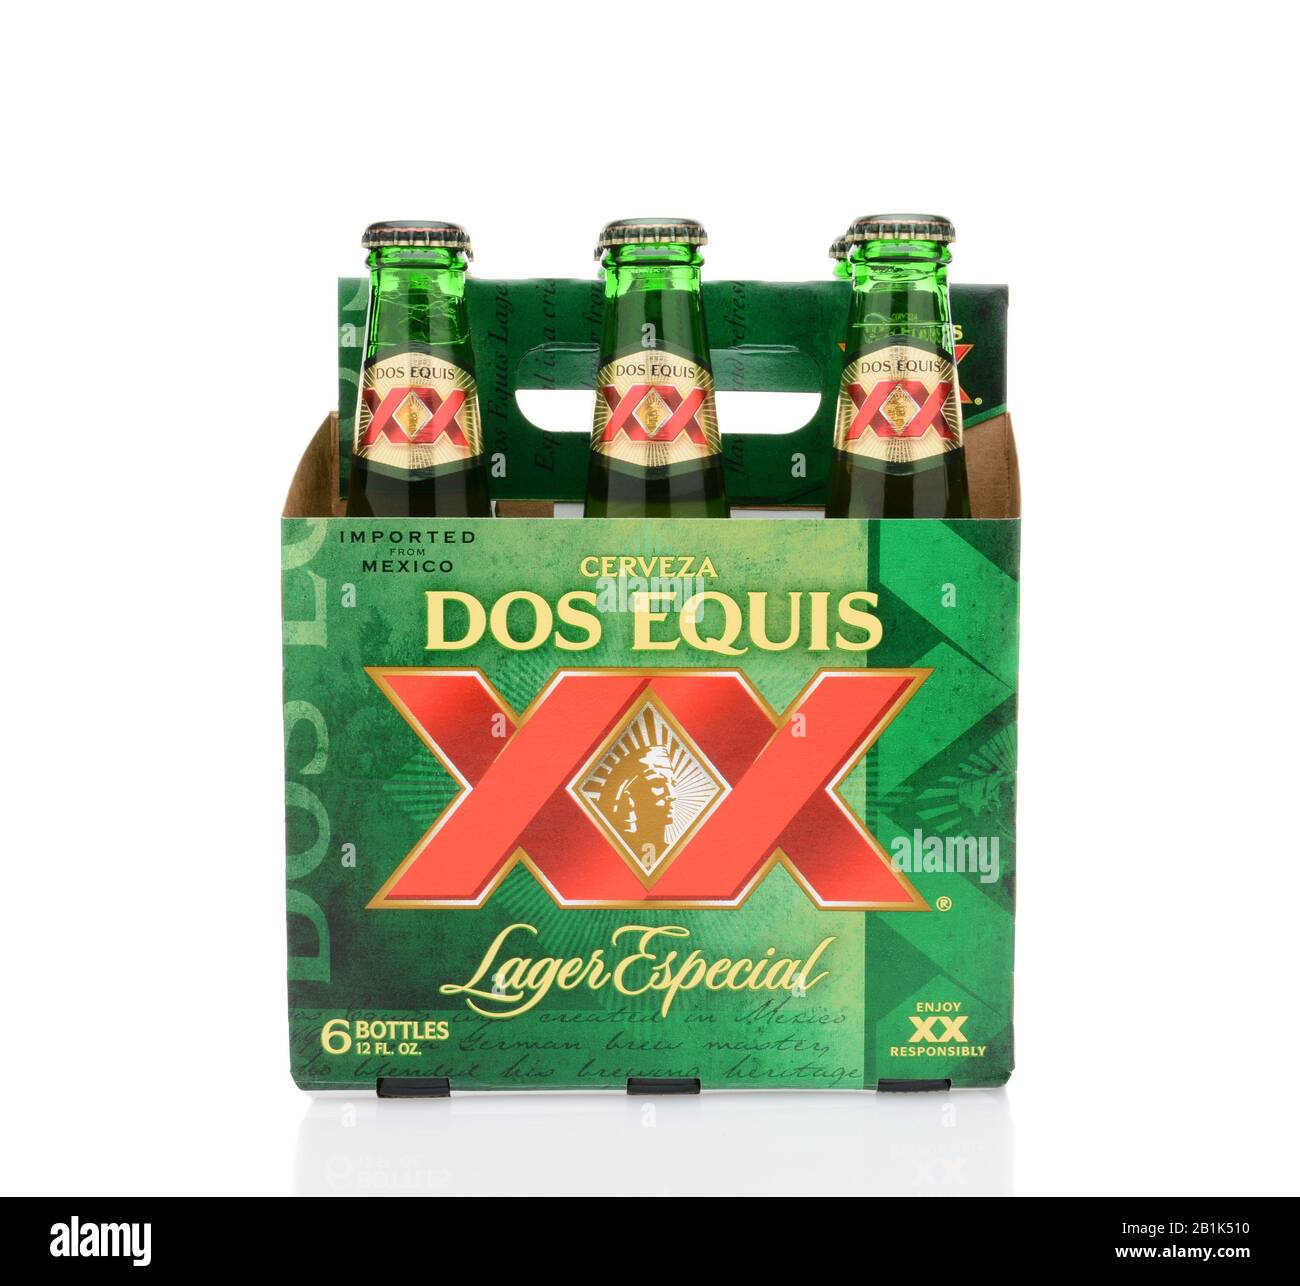 IRVINE, CA - MAY 25, 2014: A 6 pack of Dos Equis Lager Especial. Founded in 1890 from the Cuauhtemoc-Moctezuma Brewery in Monterrey, Mexico a subsidar Stock Photo